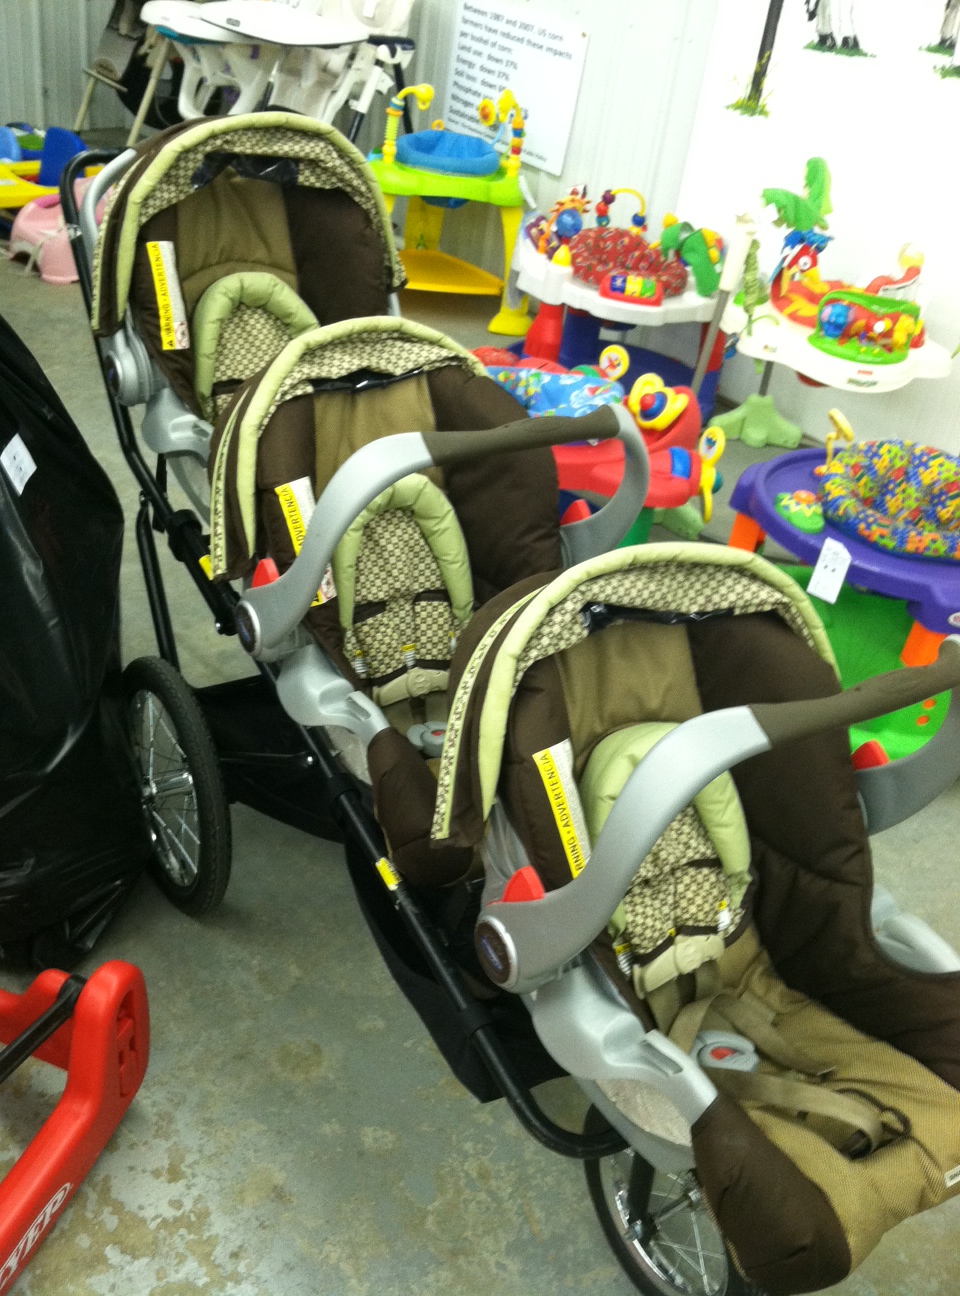 triplet stroller with car seats